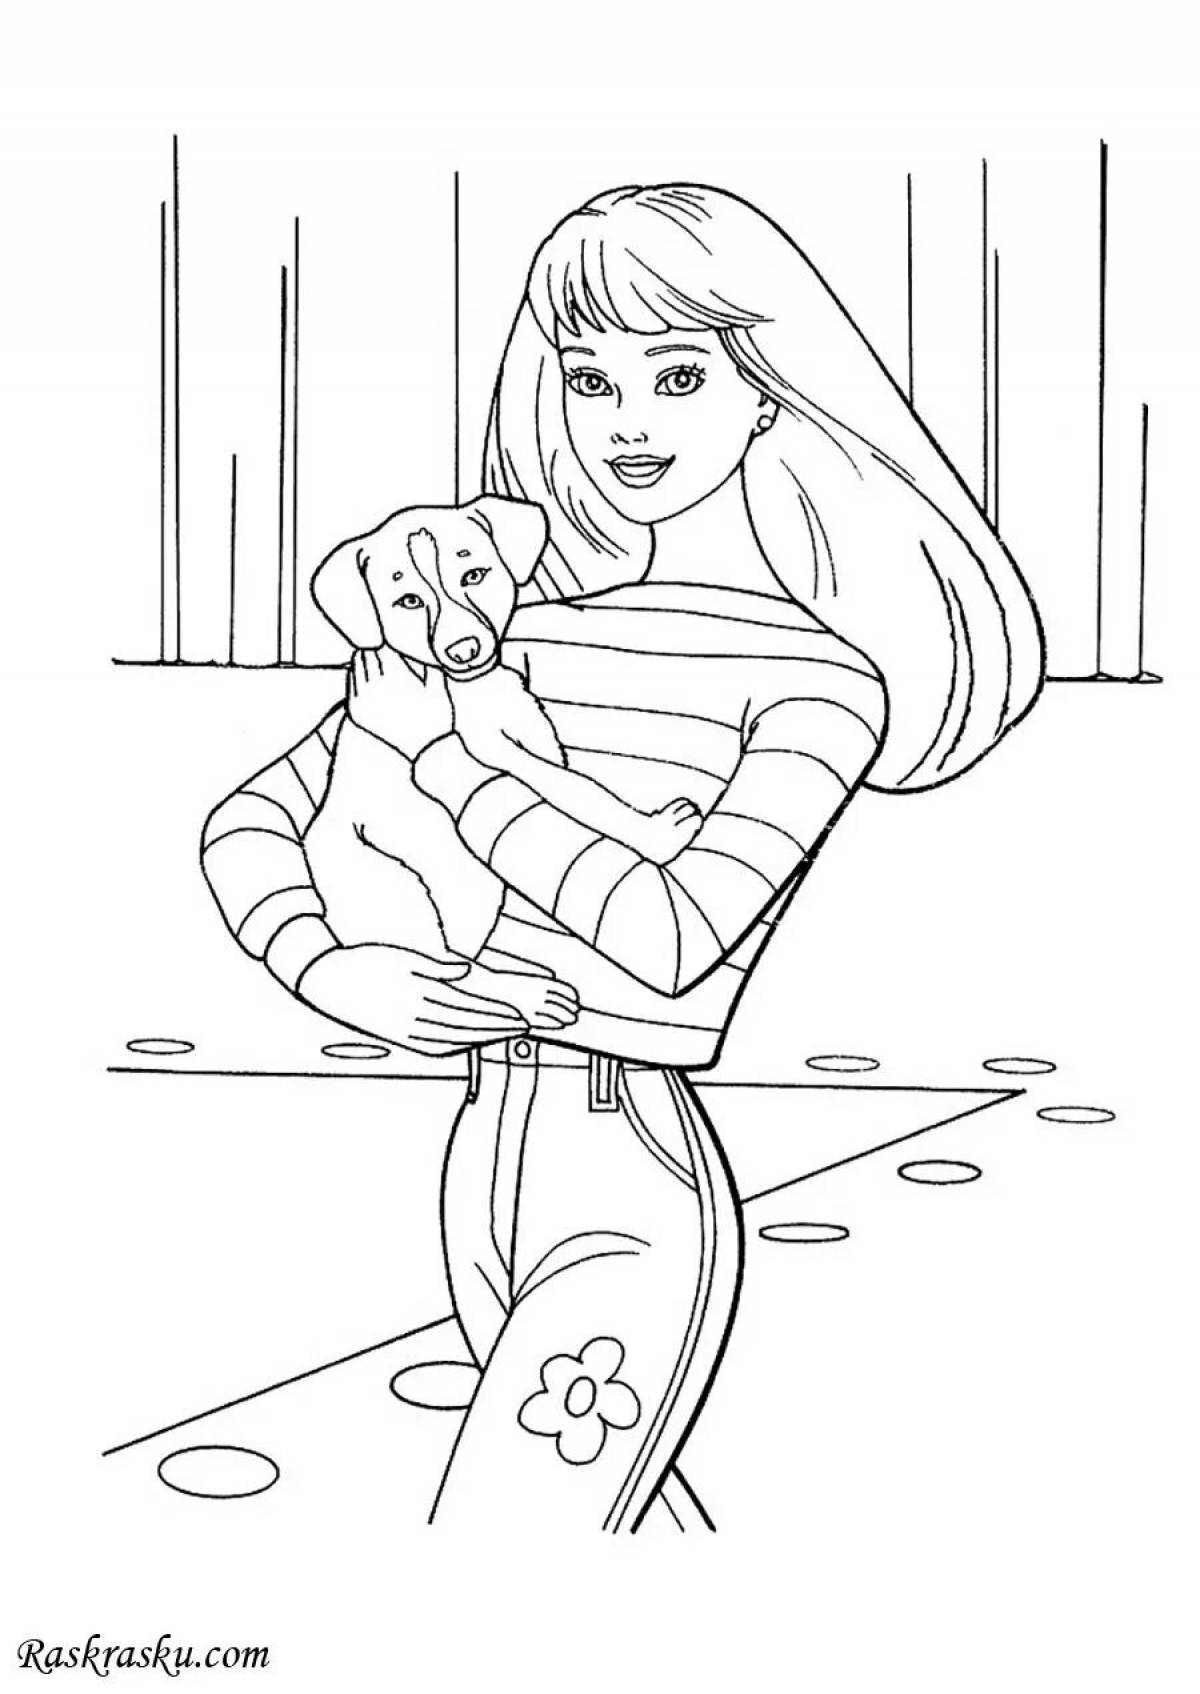 Barbie dog holiday coloring book